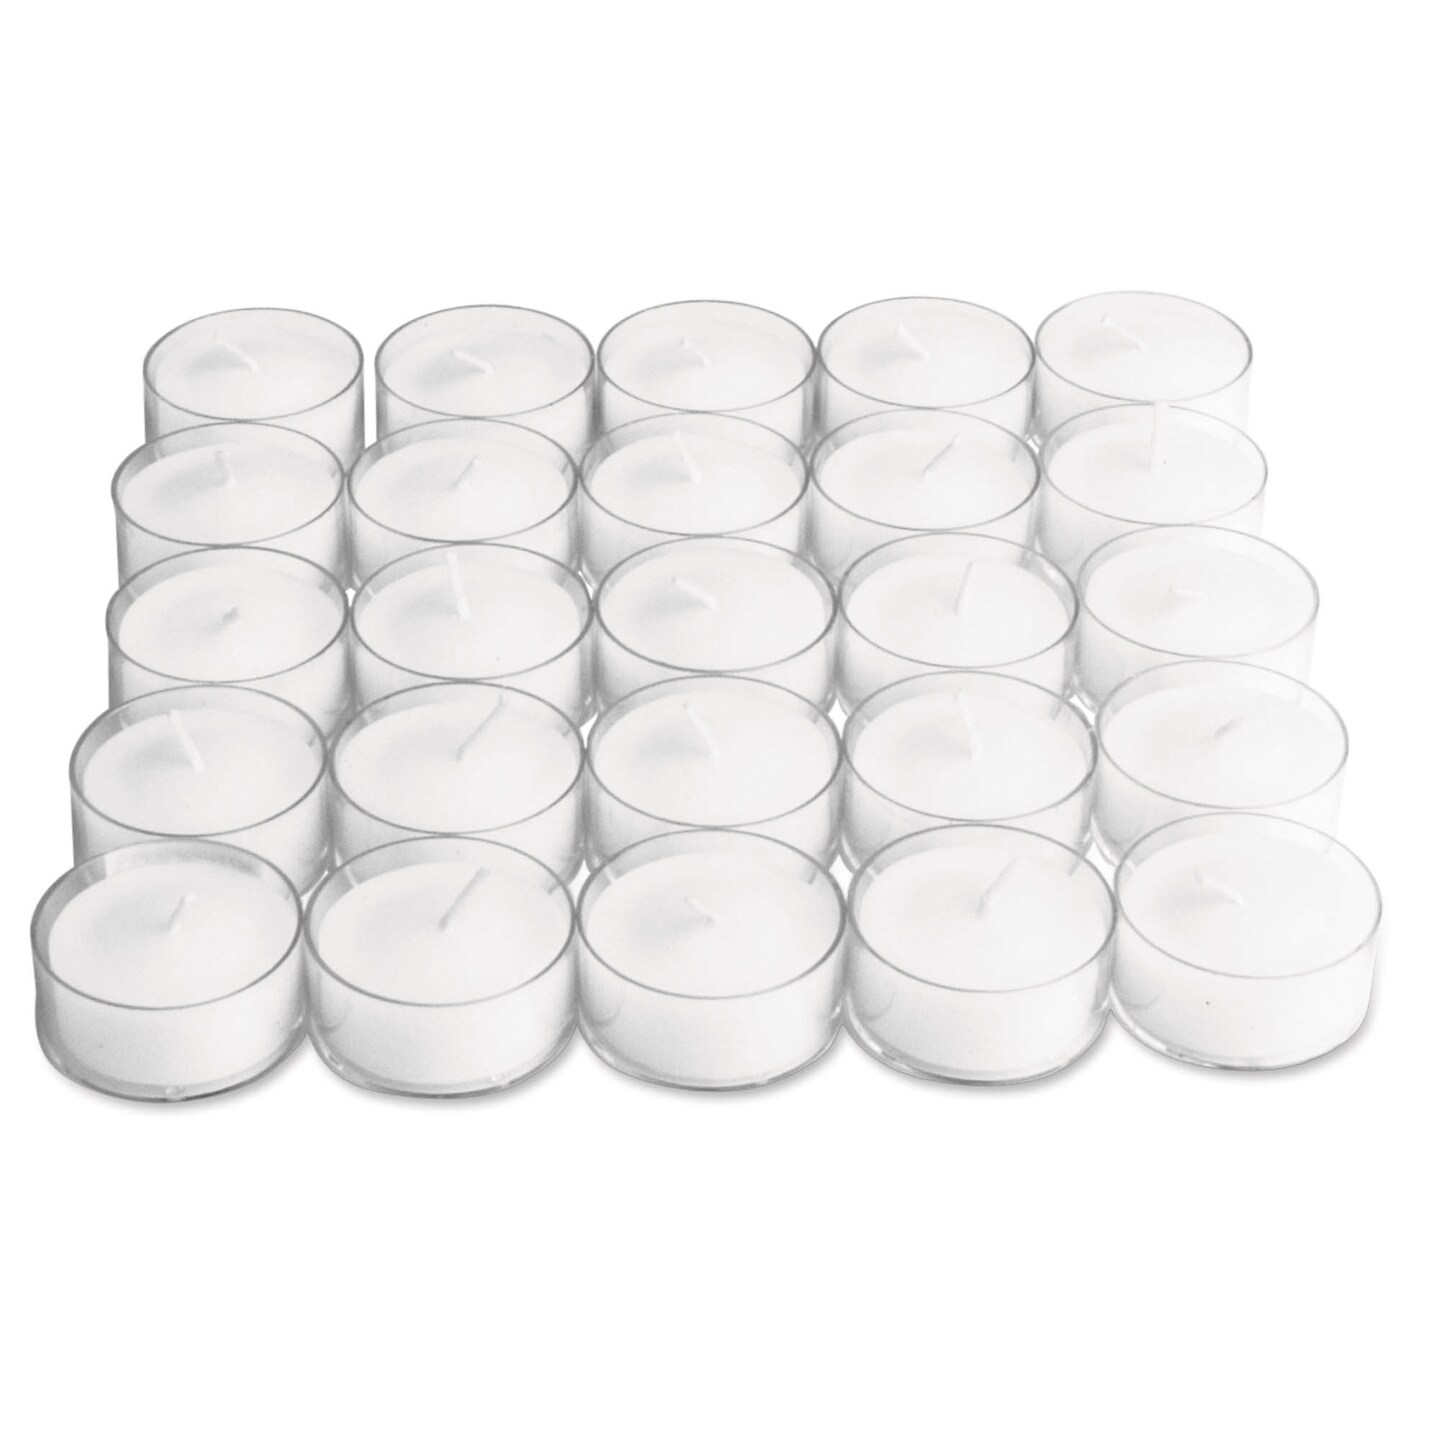 Unscented Basic Clear Cup Tealight Candle 25 Pack